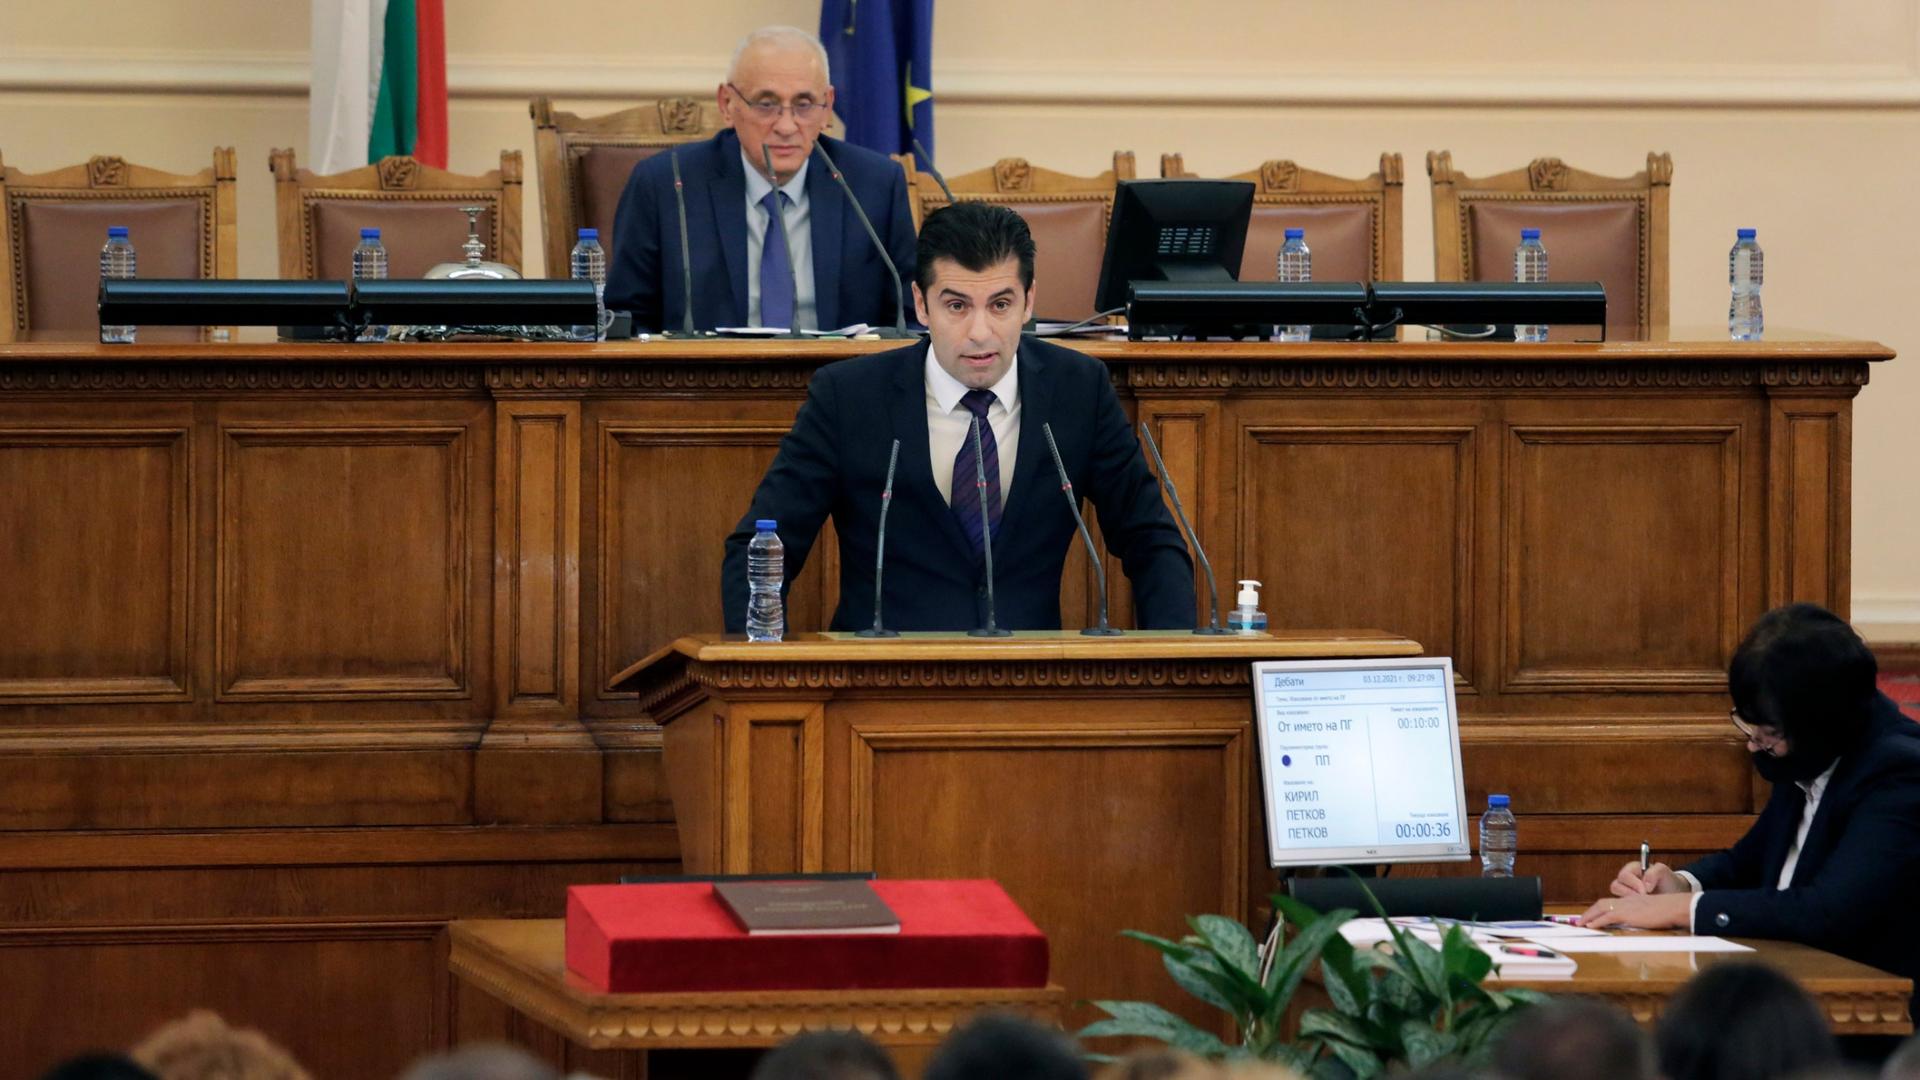 Kiril Petkov, co-leader of the We Continue the Change party, speaks during the first session of the new Bulgarian Parliament, Sofia, Friday, Dec. 3, 2021.